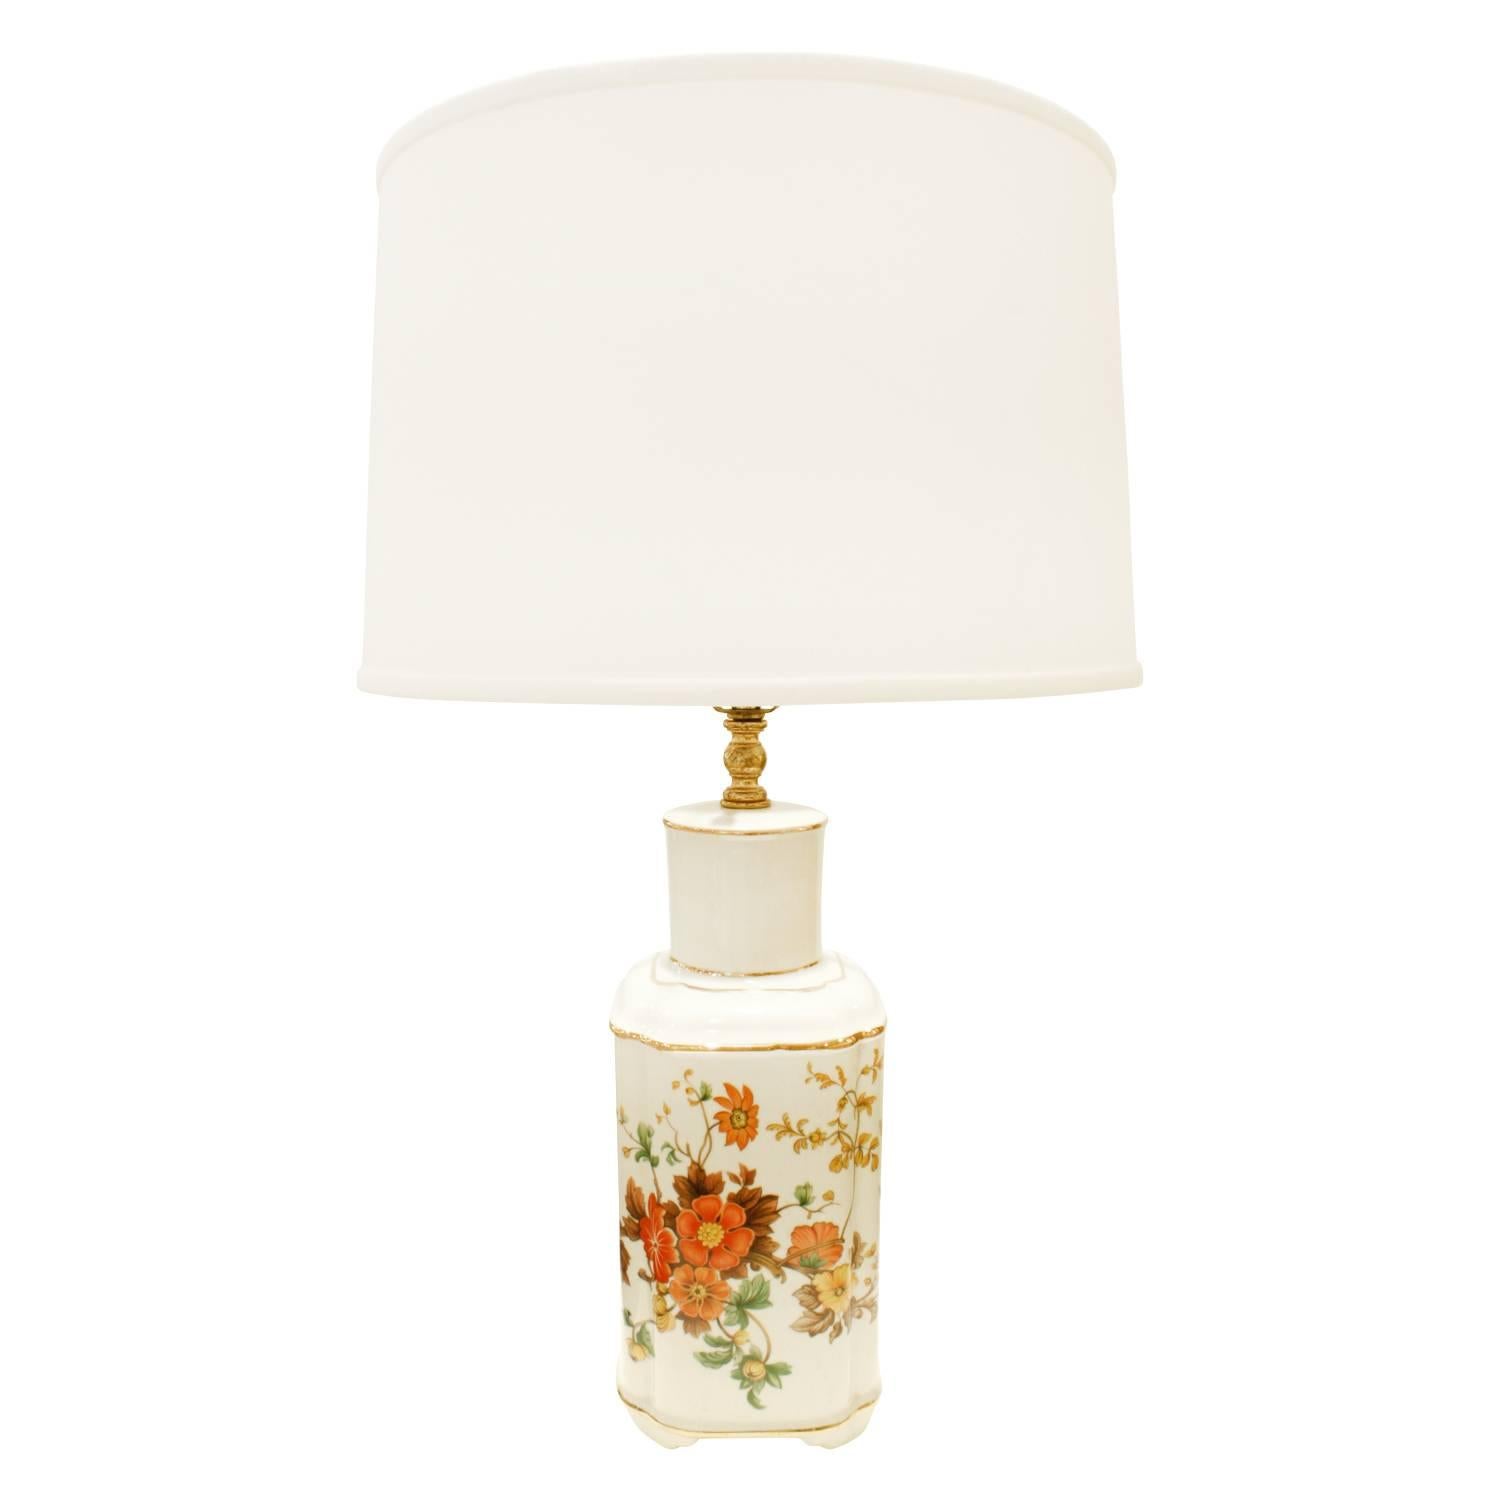  Studio Made Porcelain Table Lamp with Flowers, 1960s For Sale